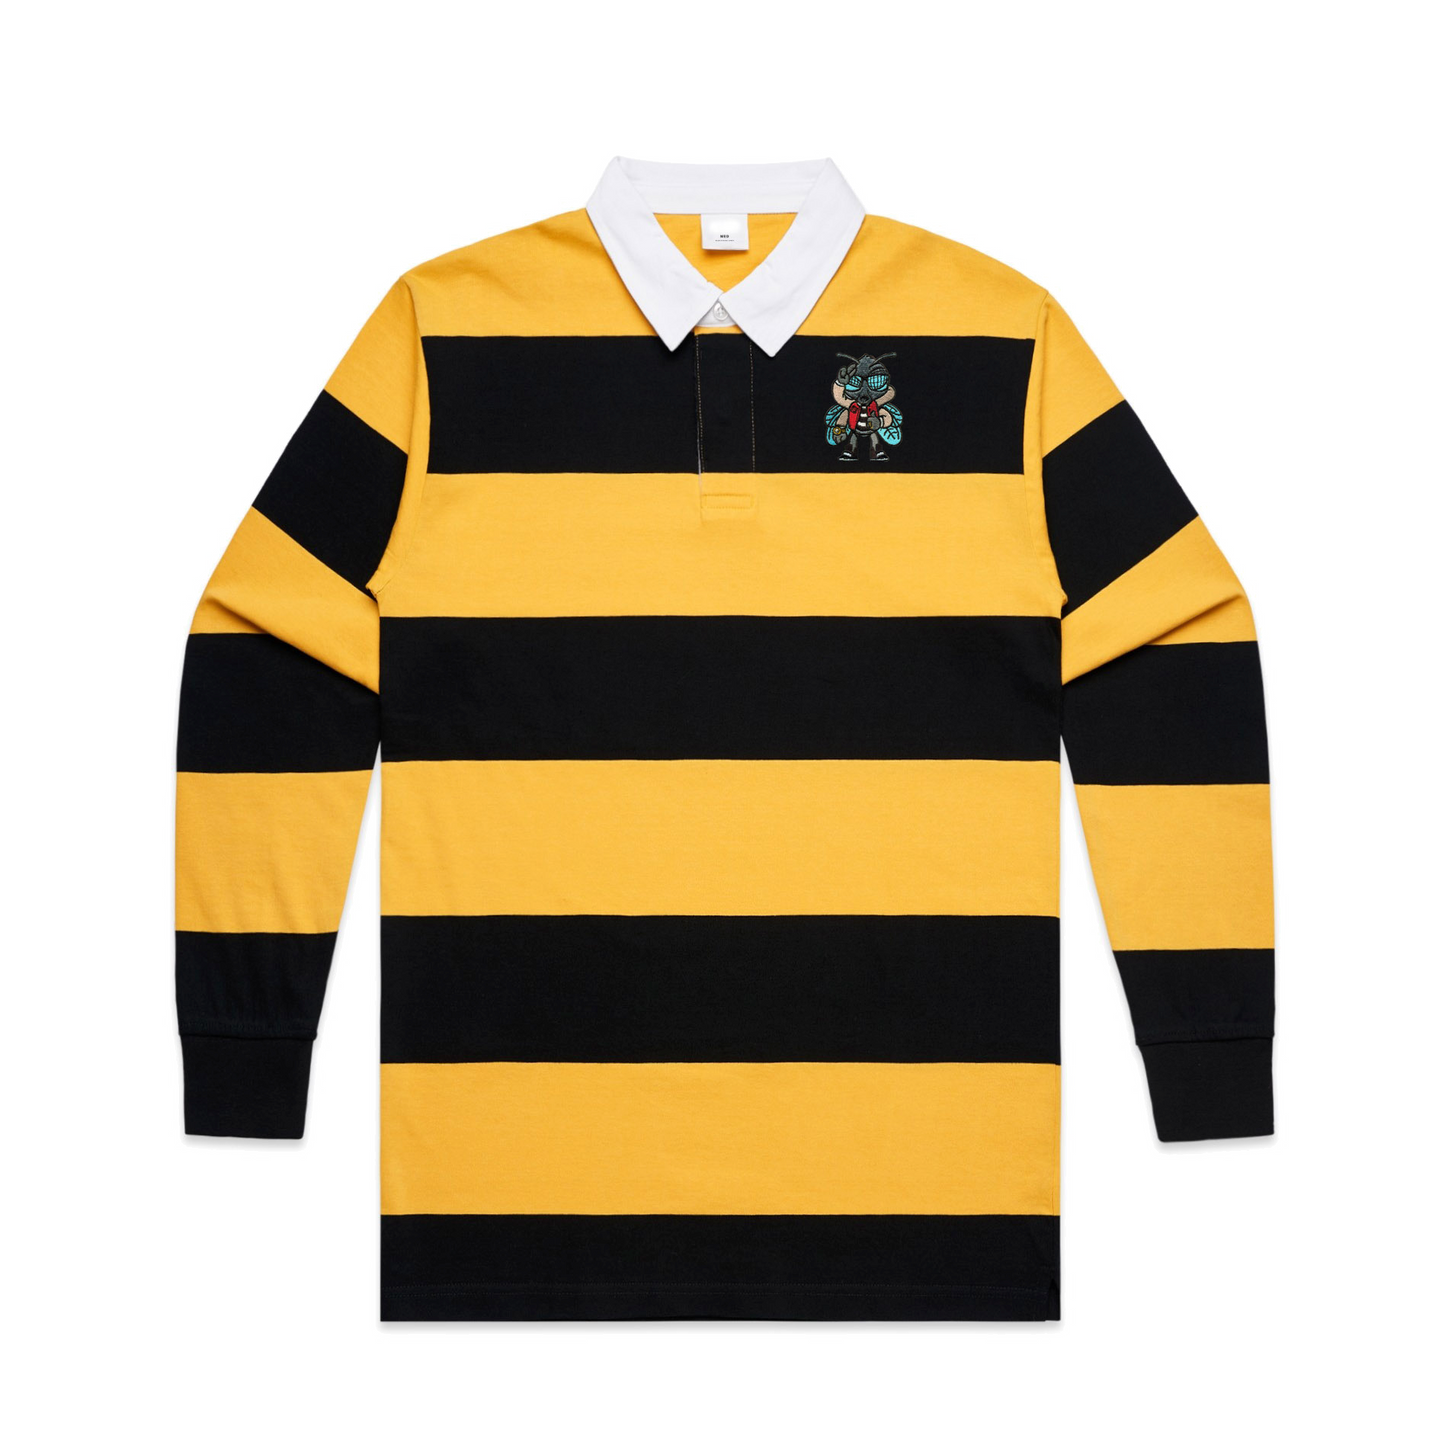 Fly Guy L/S Unisex Rugby - Black/Yellow